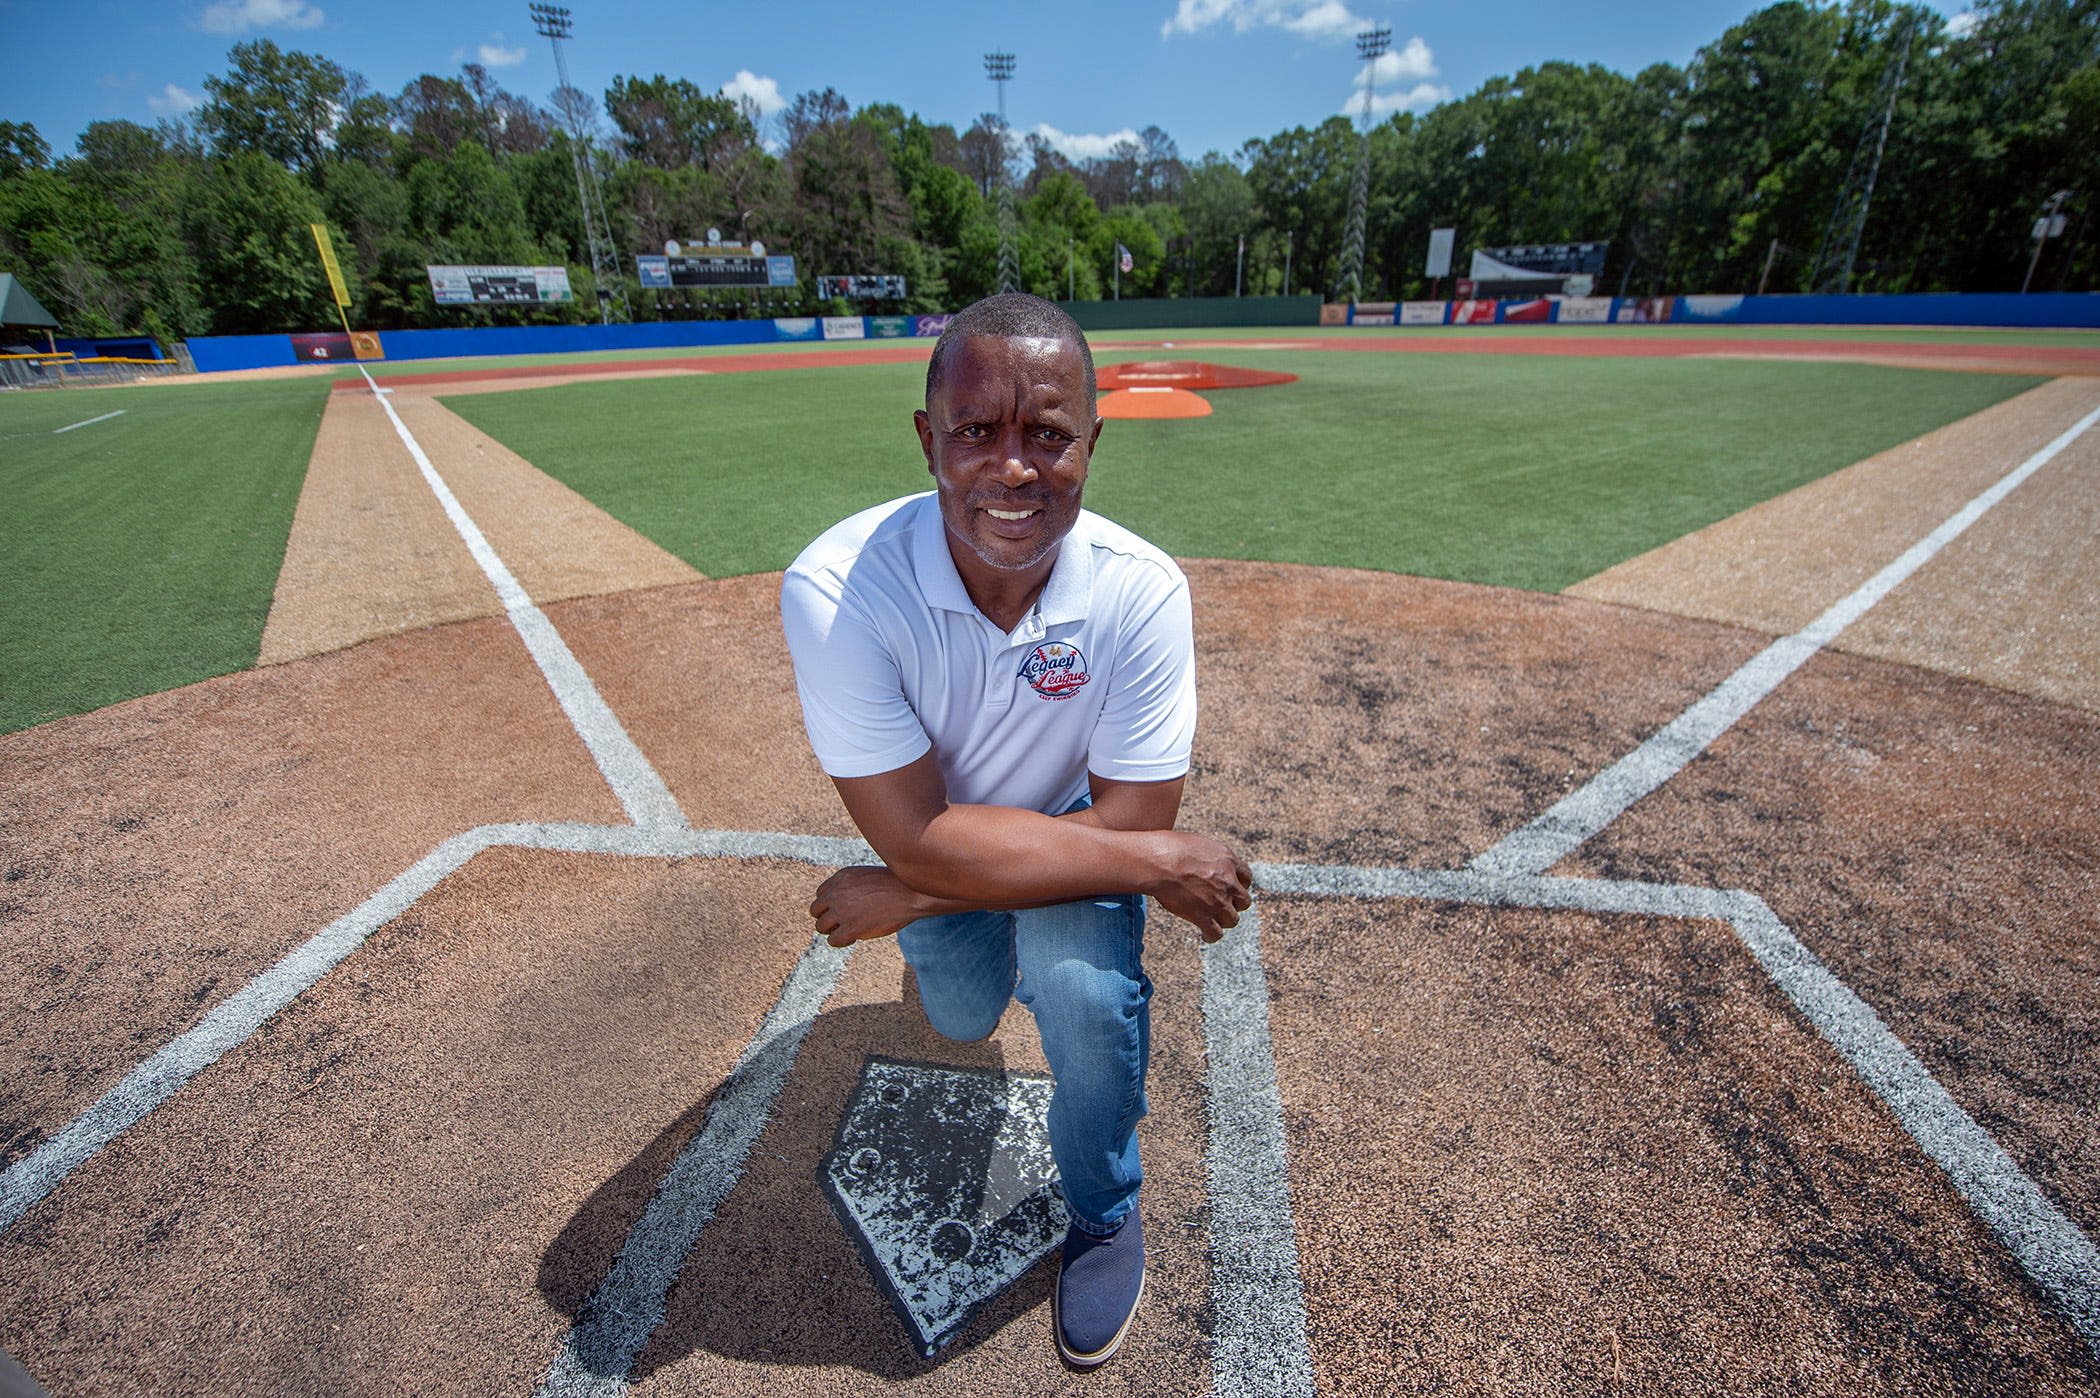 'Melting pot of baseball': Legacy League aims to lift up players in The South, internationally